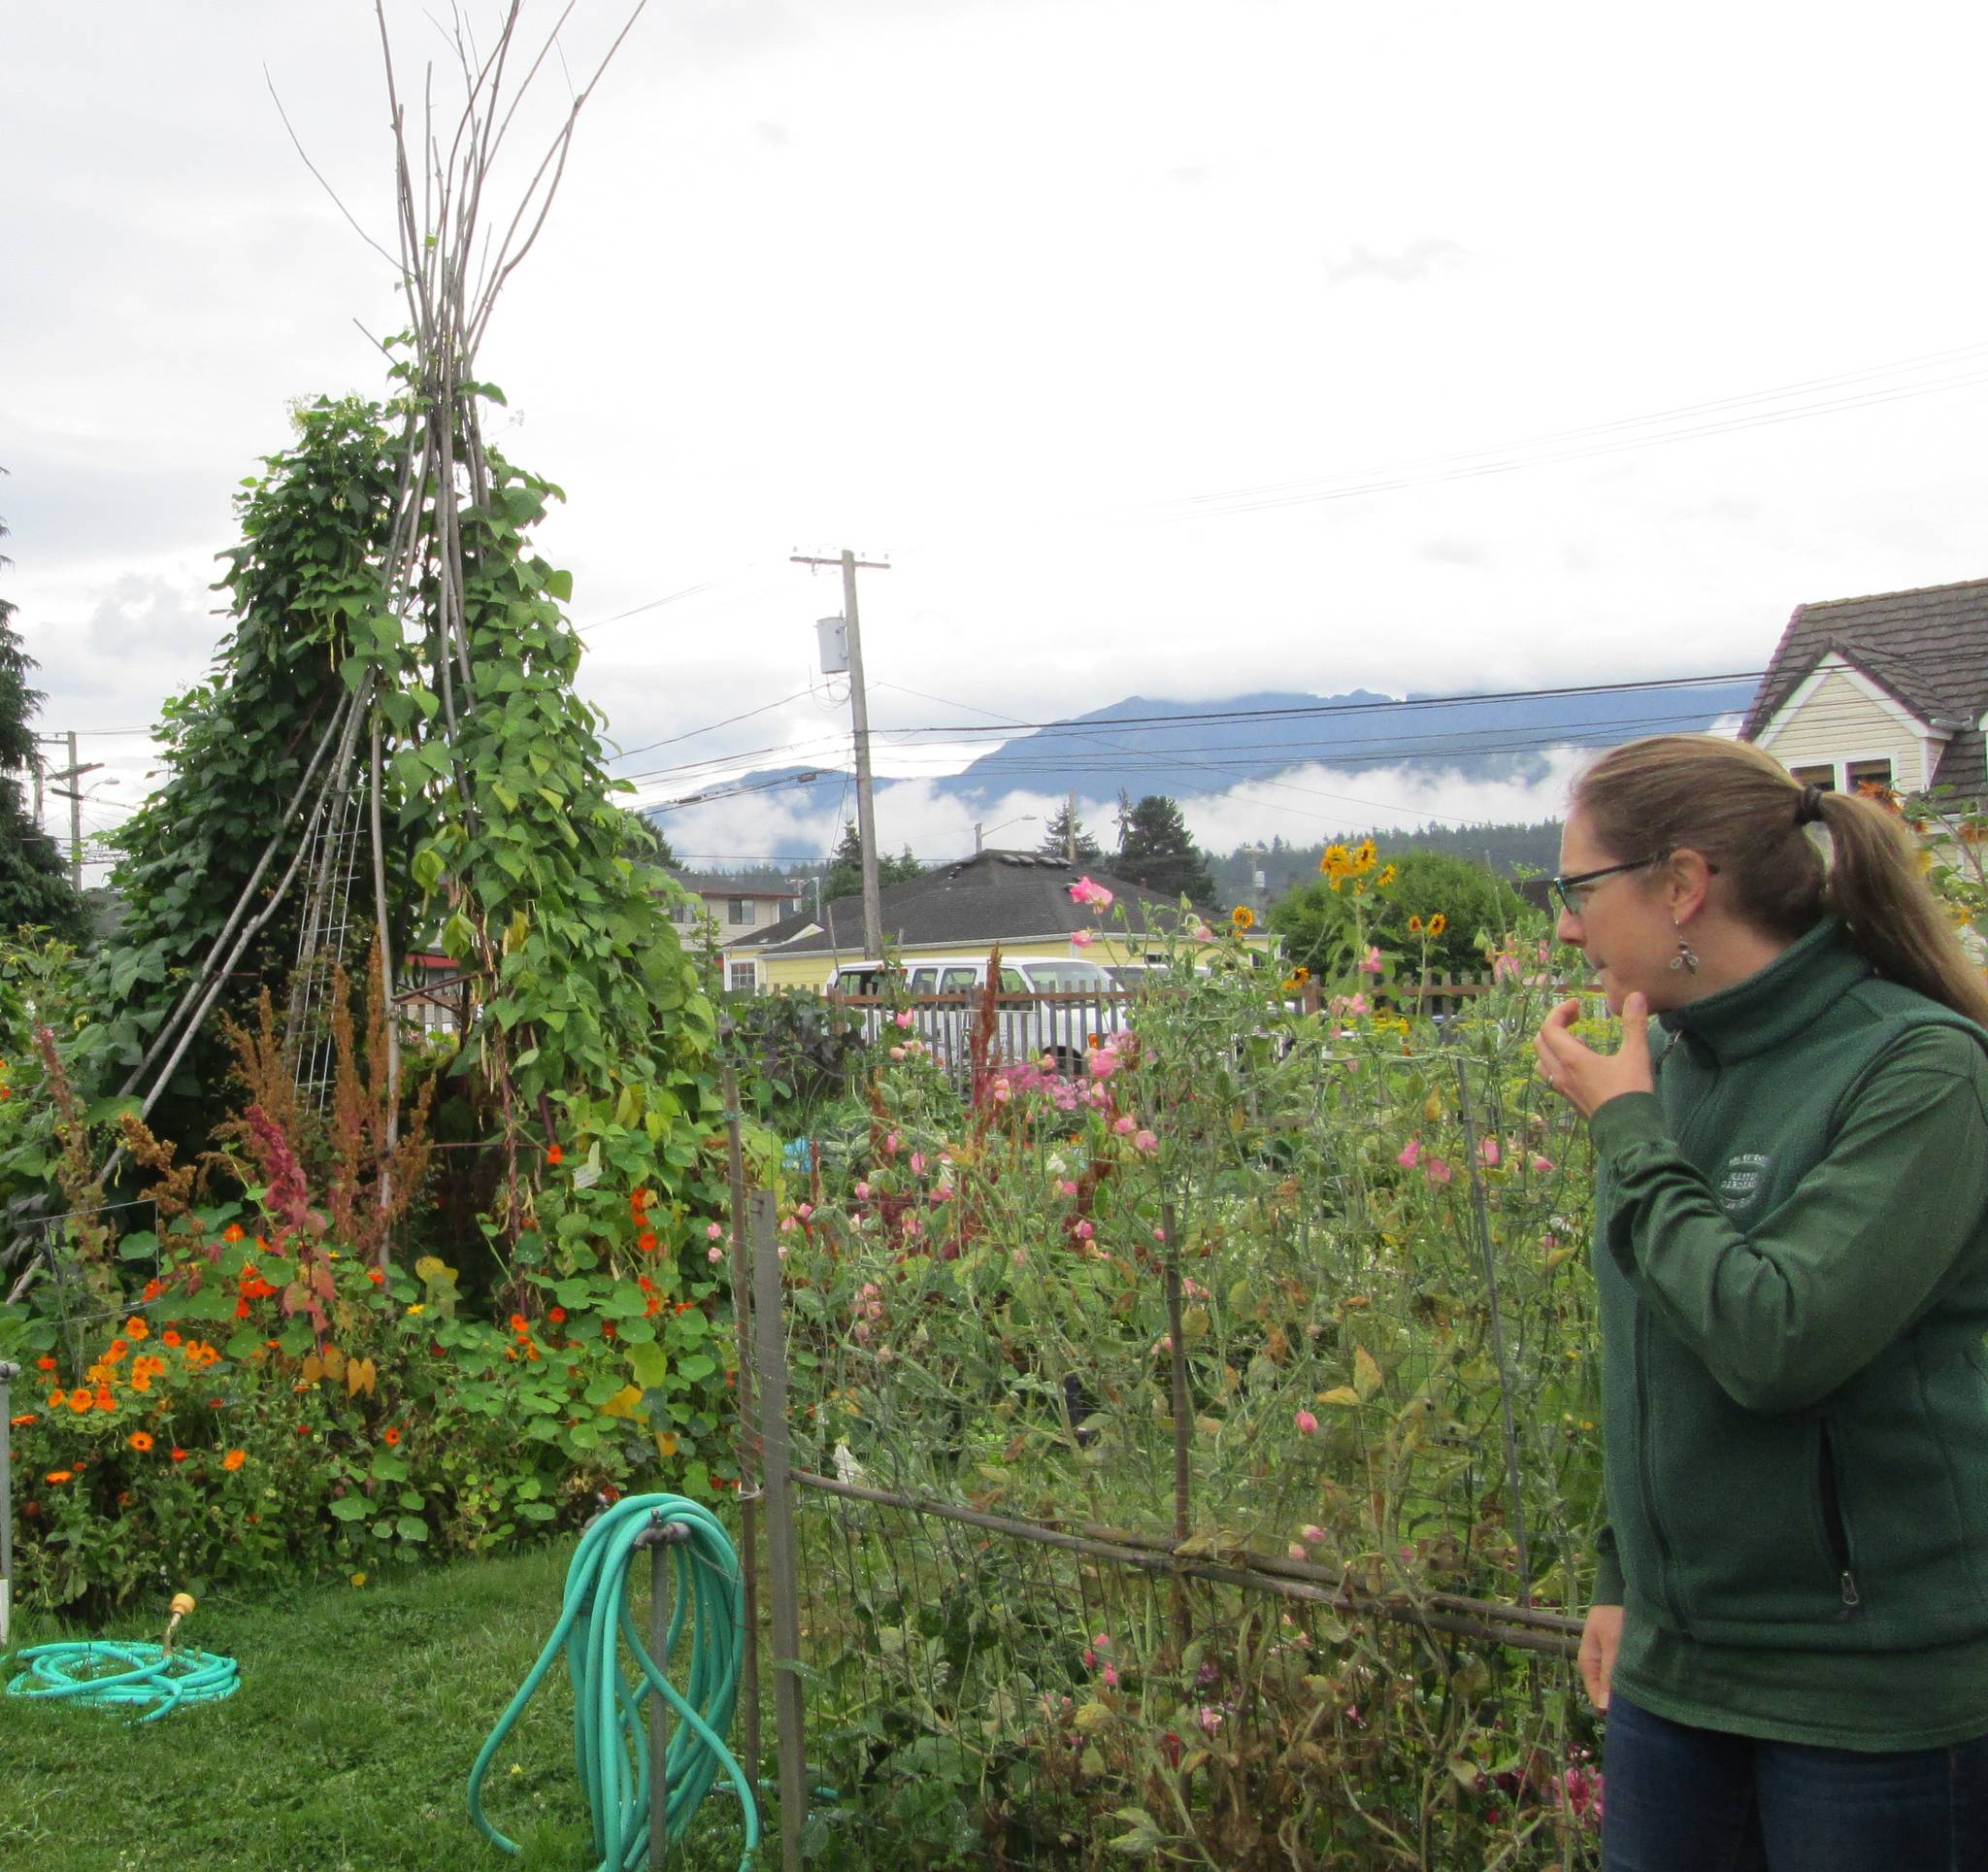 Laurel Moulton, pictured here at the 5th Street community garden in Port Angeles, hosts a presentation on “Growing Legumes for Fresh Eating and Storage” on May 14. Photo courtesy of Laurel Moulton